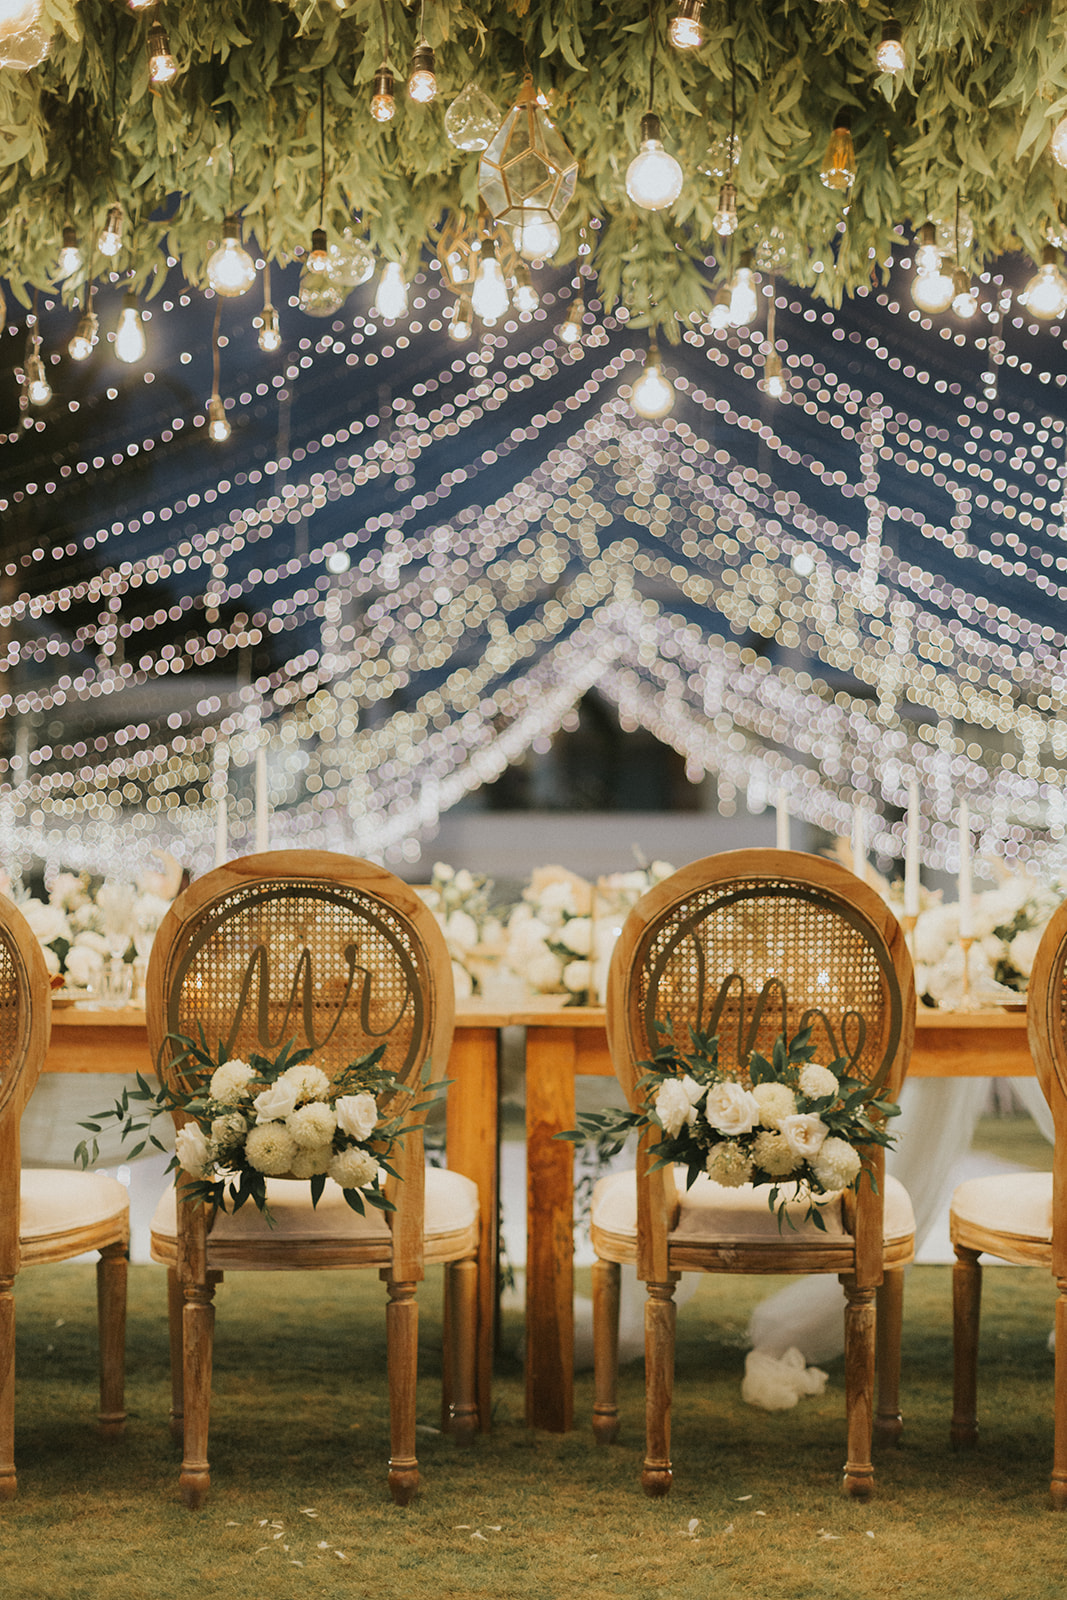 Rustic luxury wedding theme, indulge in a timeless palette of earthy tones.